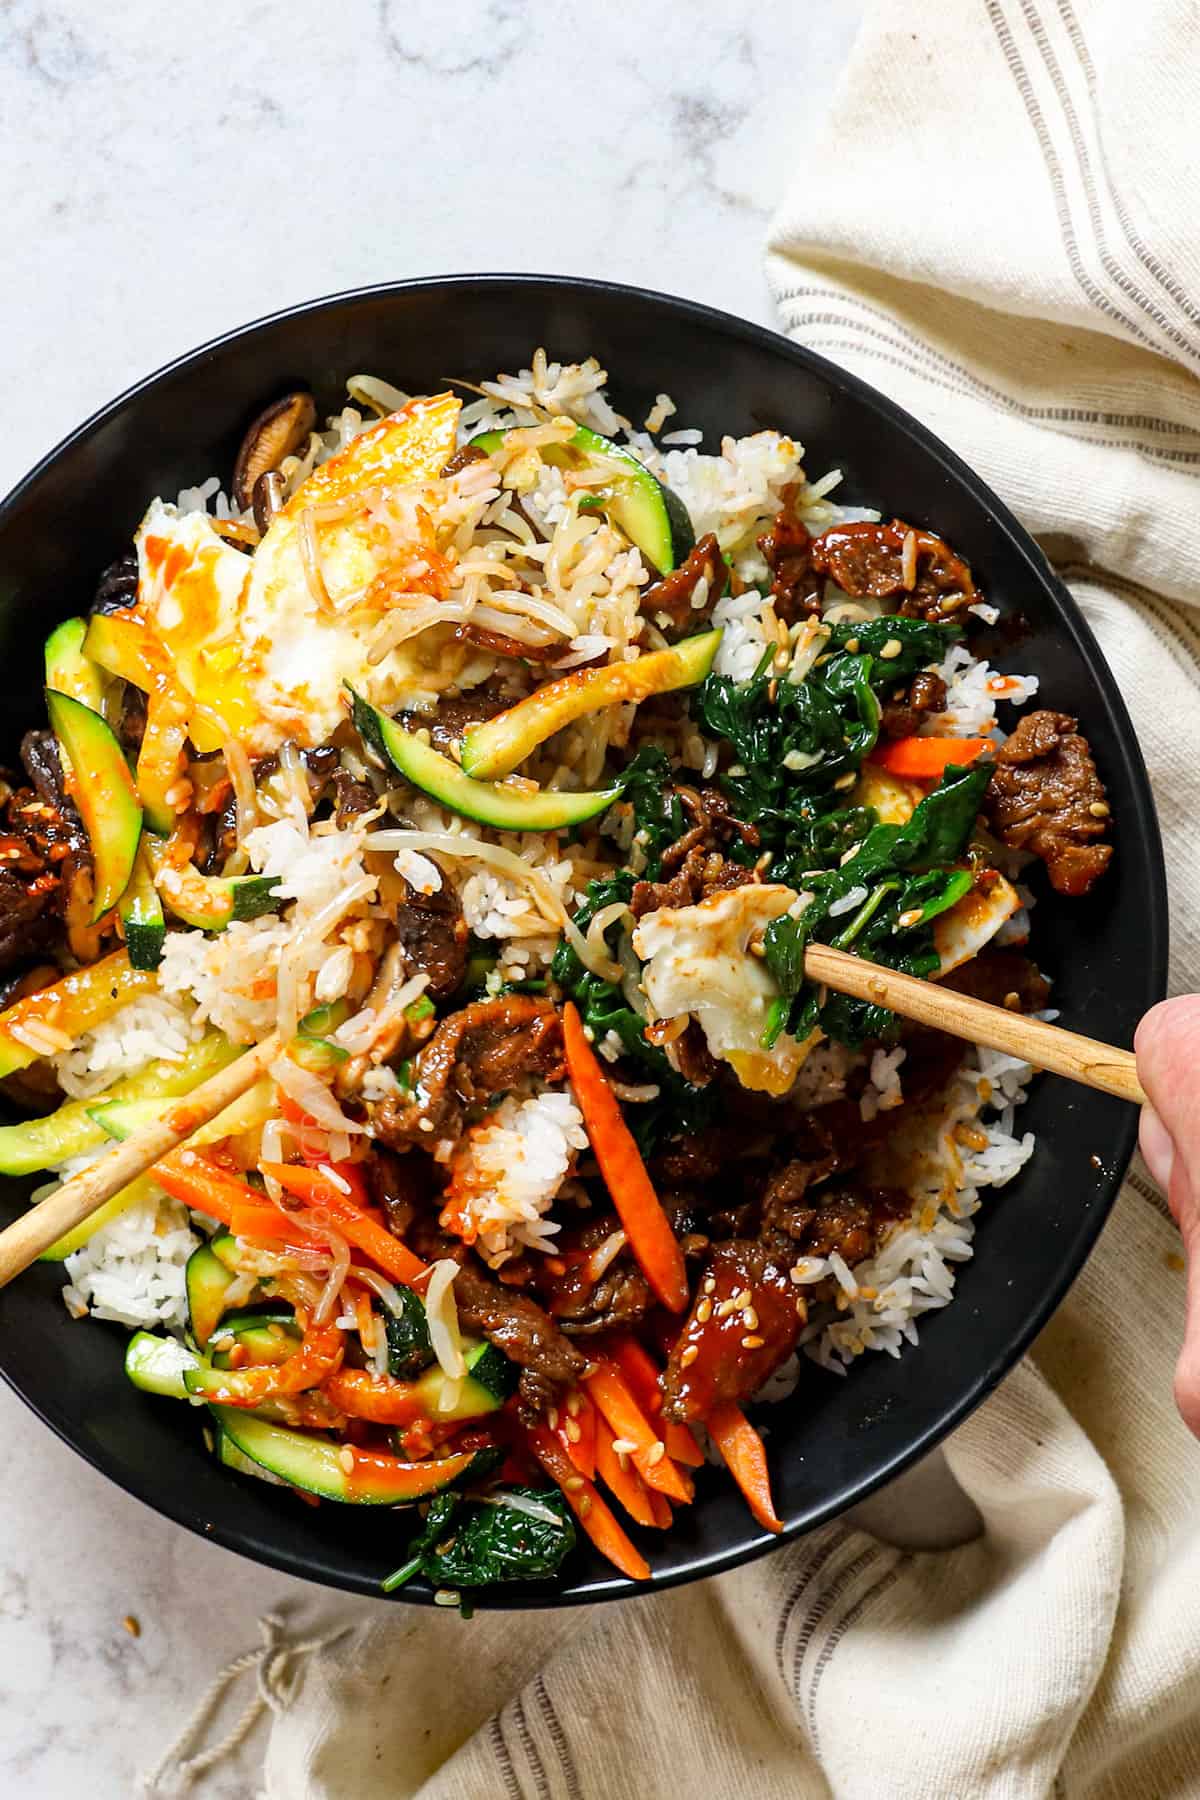 showing how to eat bibimbap by tossing the ingredients together with chopsticsk